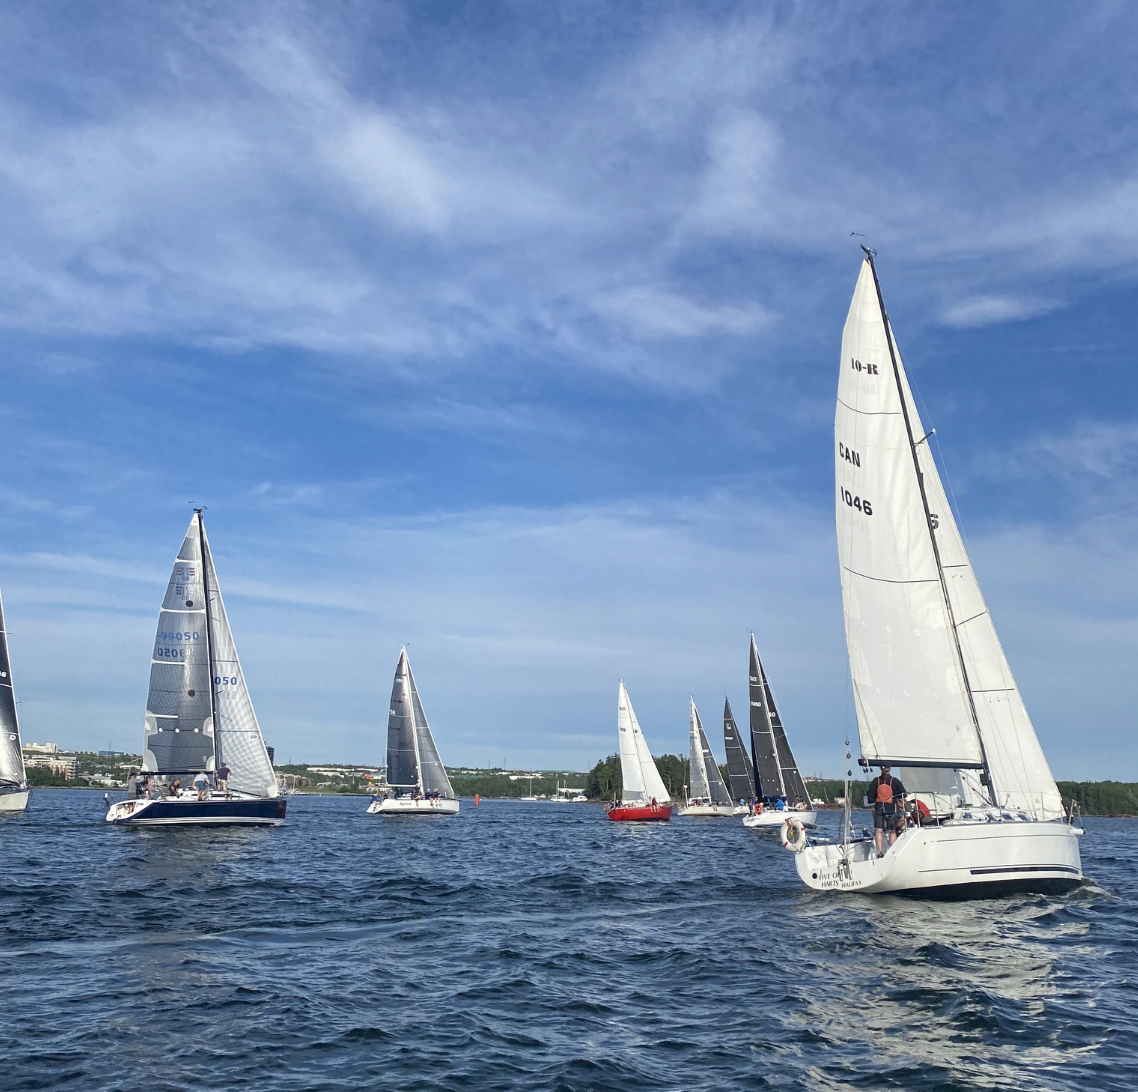 Sailboat racing on the Bedford Basin